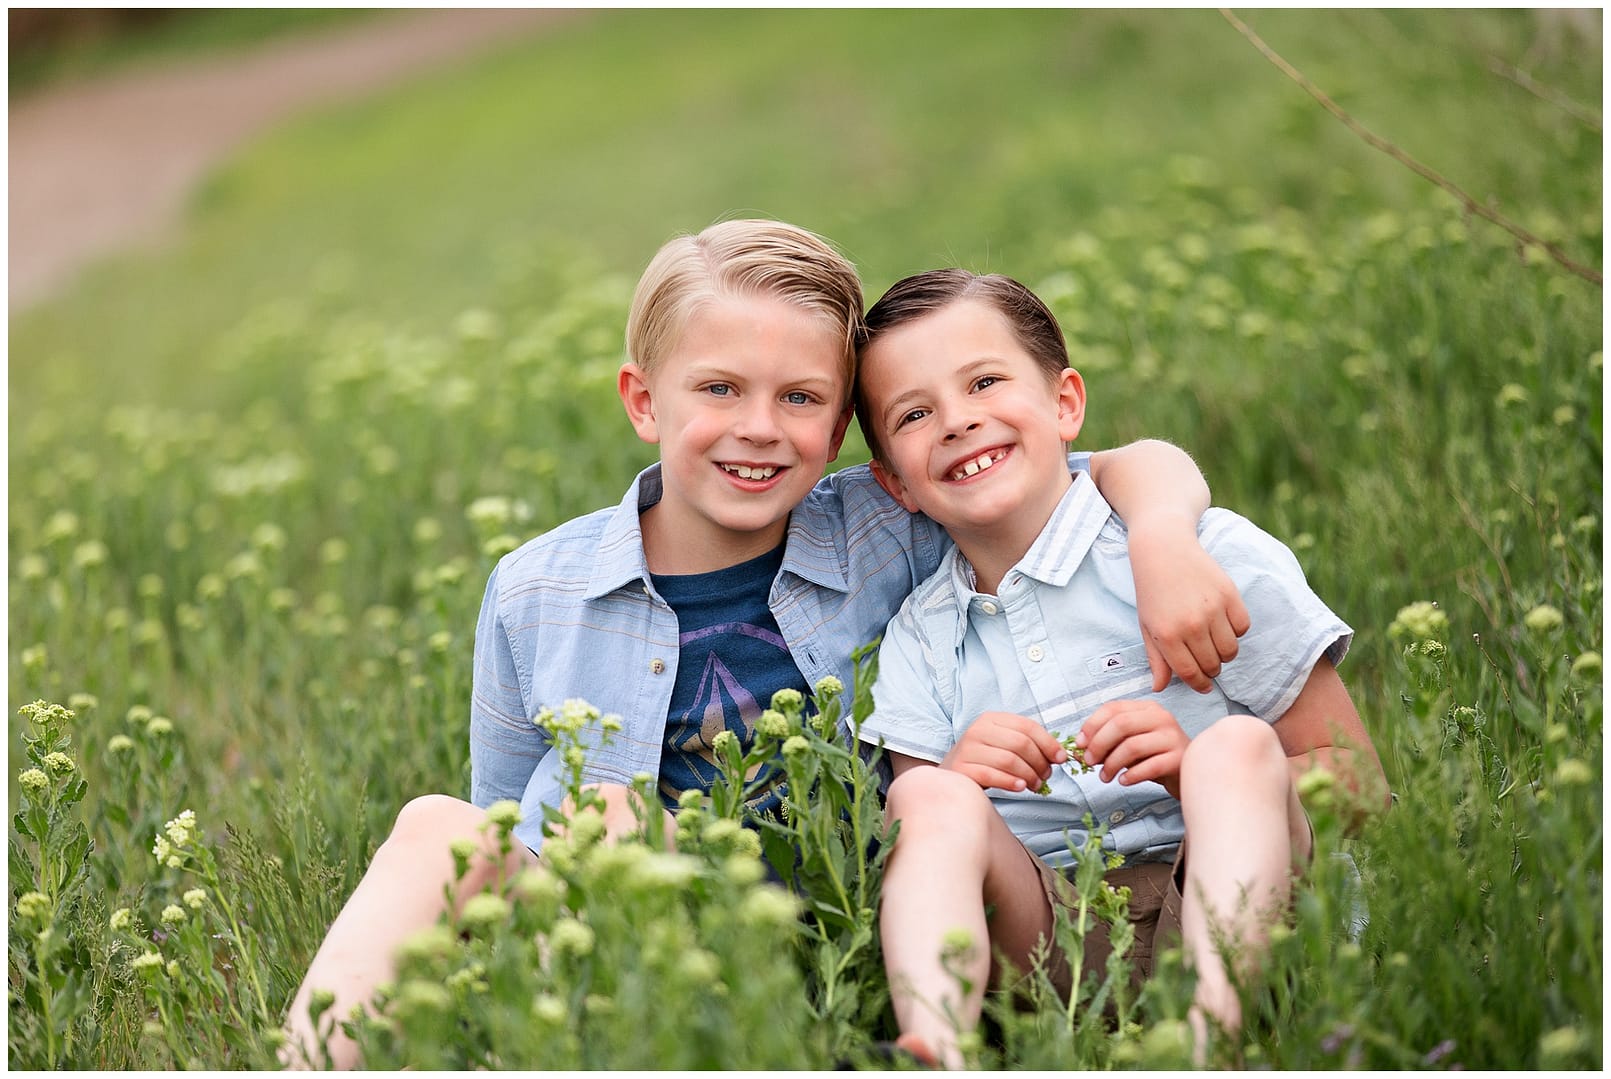 Brother pose for a portrait. Photo by Tiffany Hix Photography.